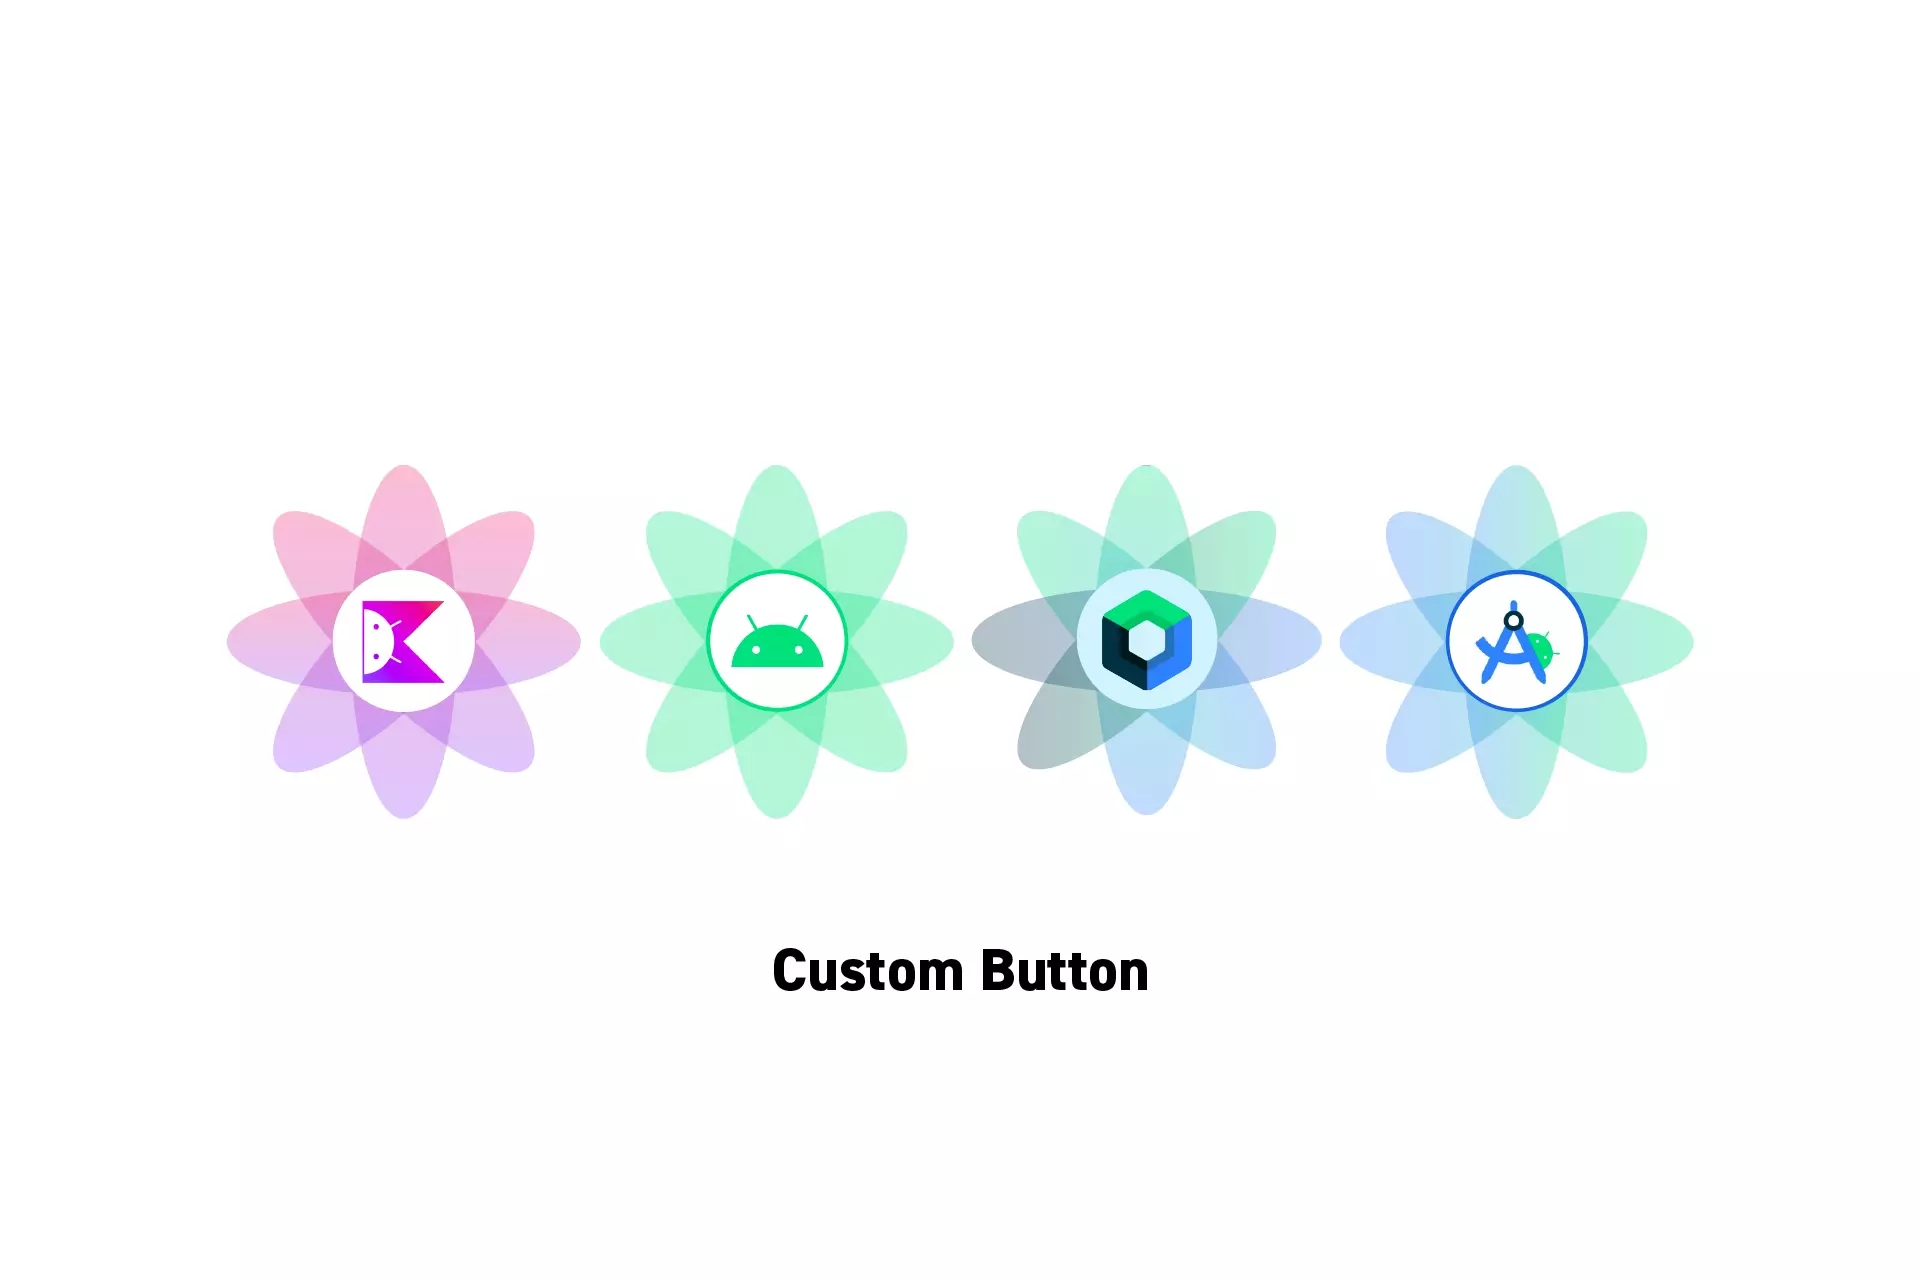 Four flowers that represent Kotlin, Android, Jetpack Compose and Android Studio side by side. Beneath them sits the text “Custom Button.”